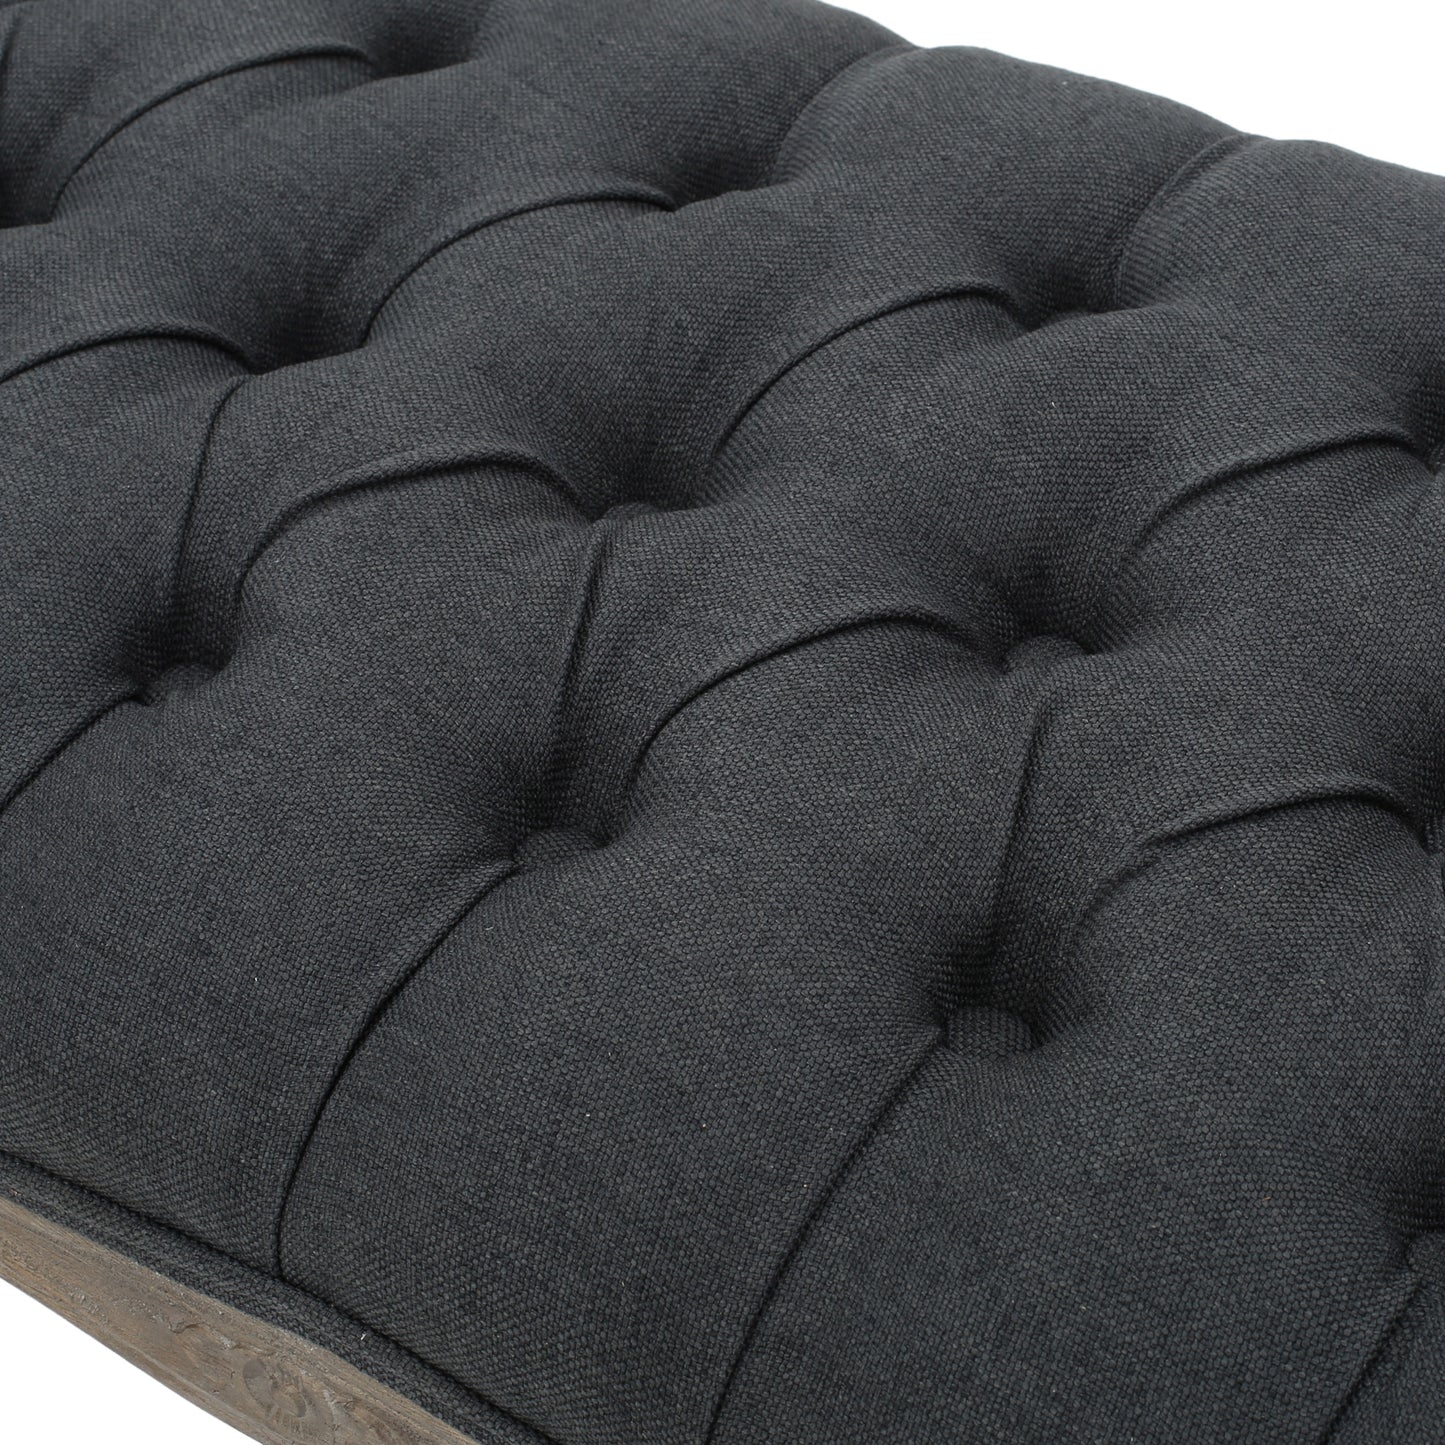 Tassette Traditional Button Tufted Fabric Bench